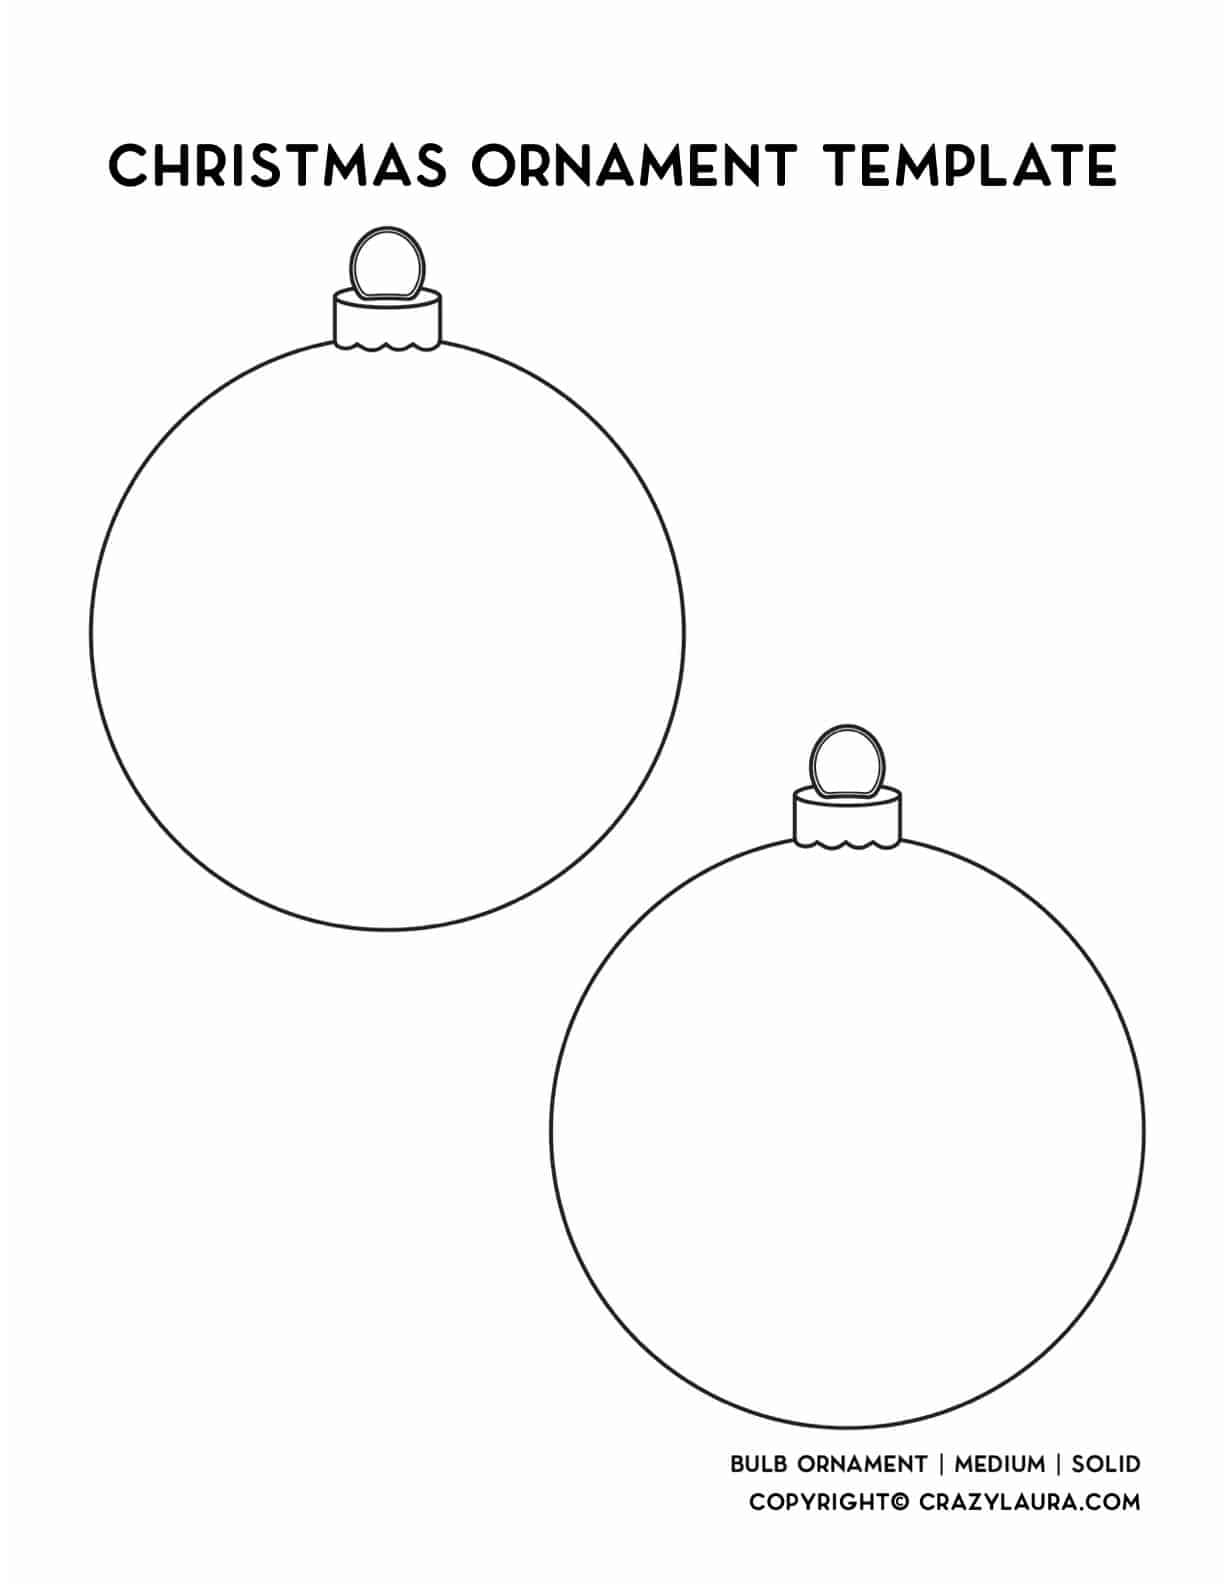 Free Christmas Ornament Template Printables Outlines Crazy Laura